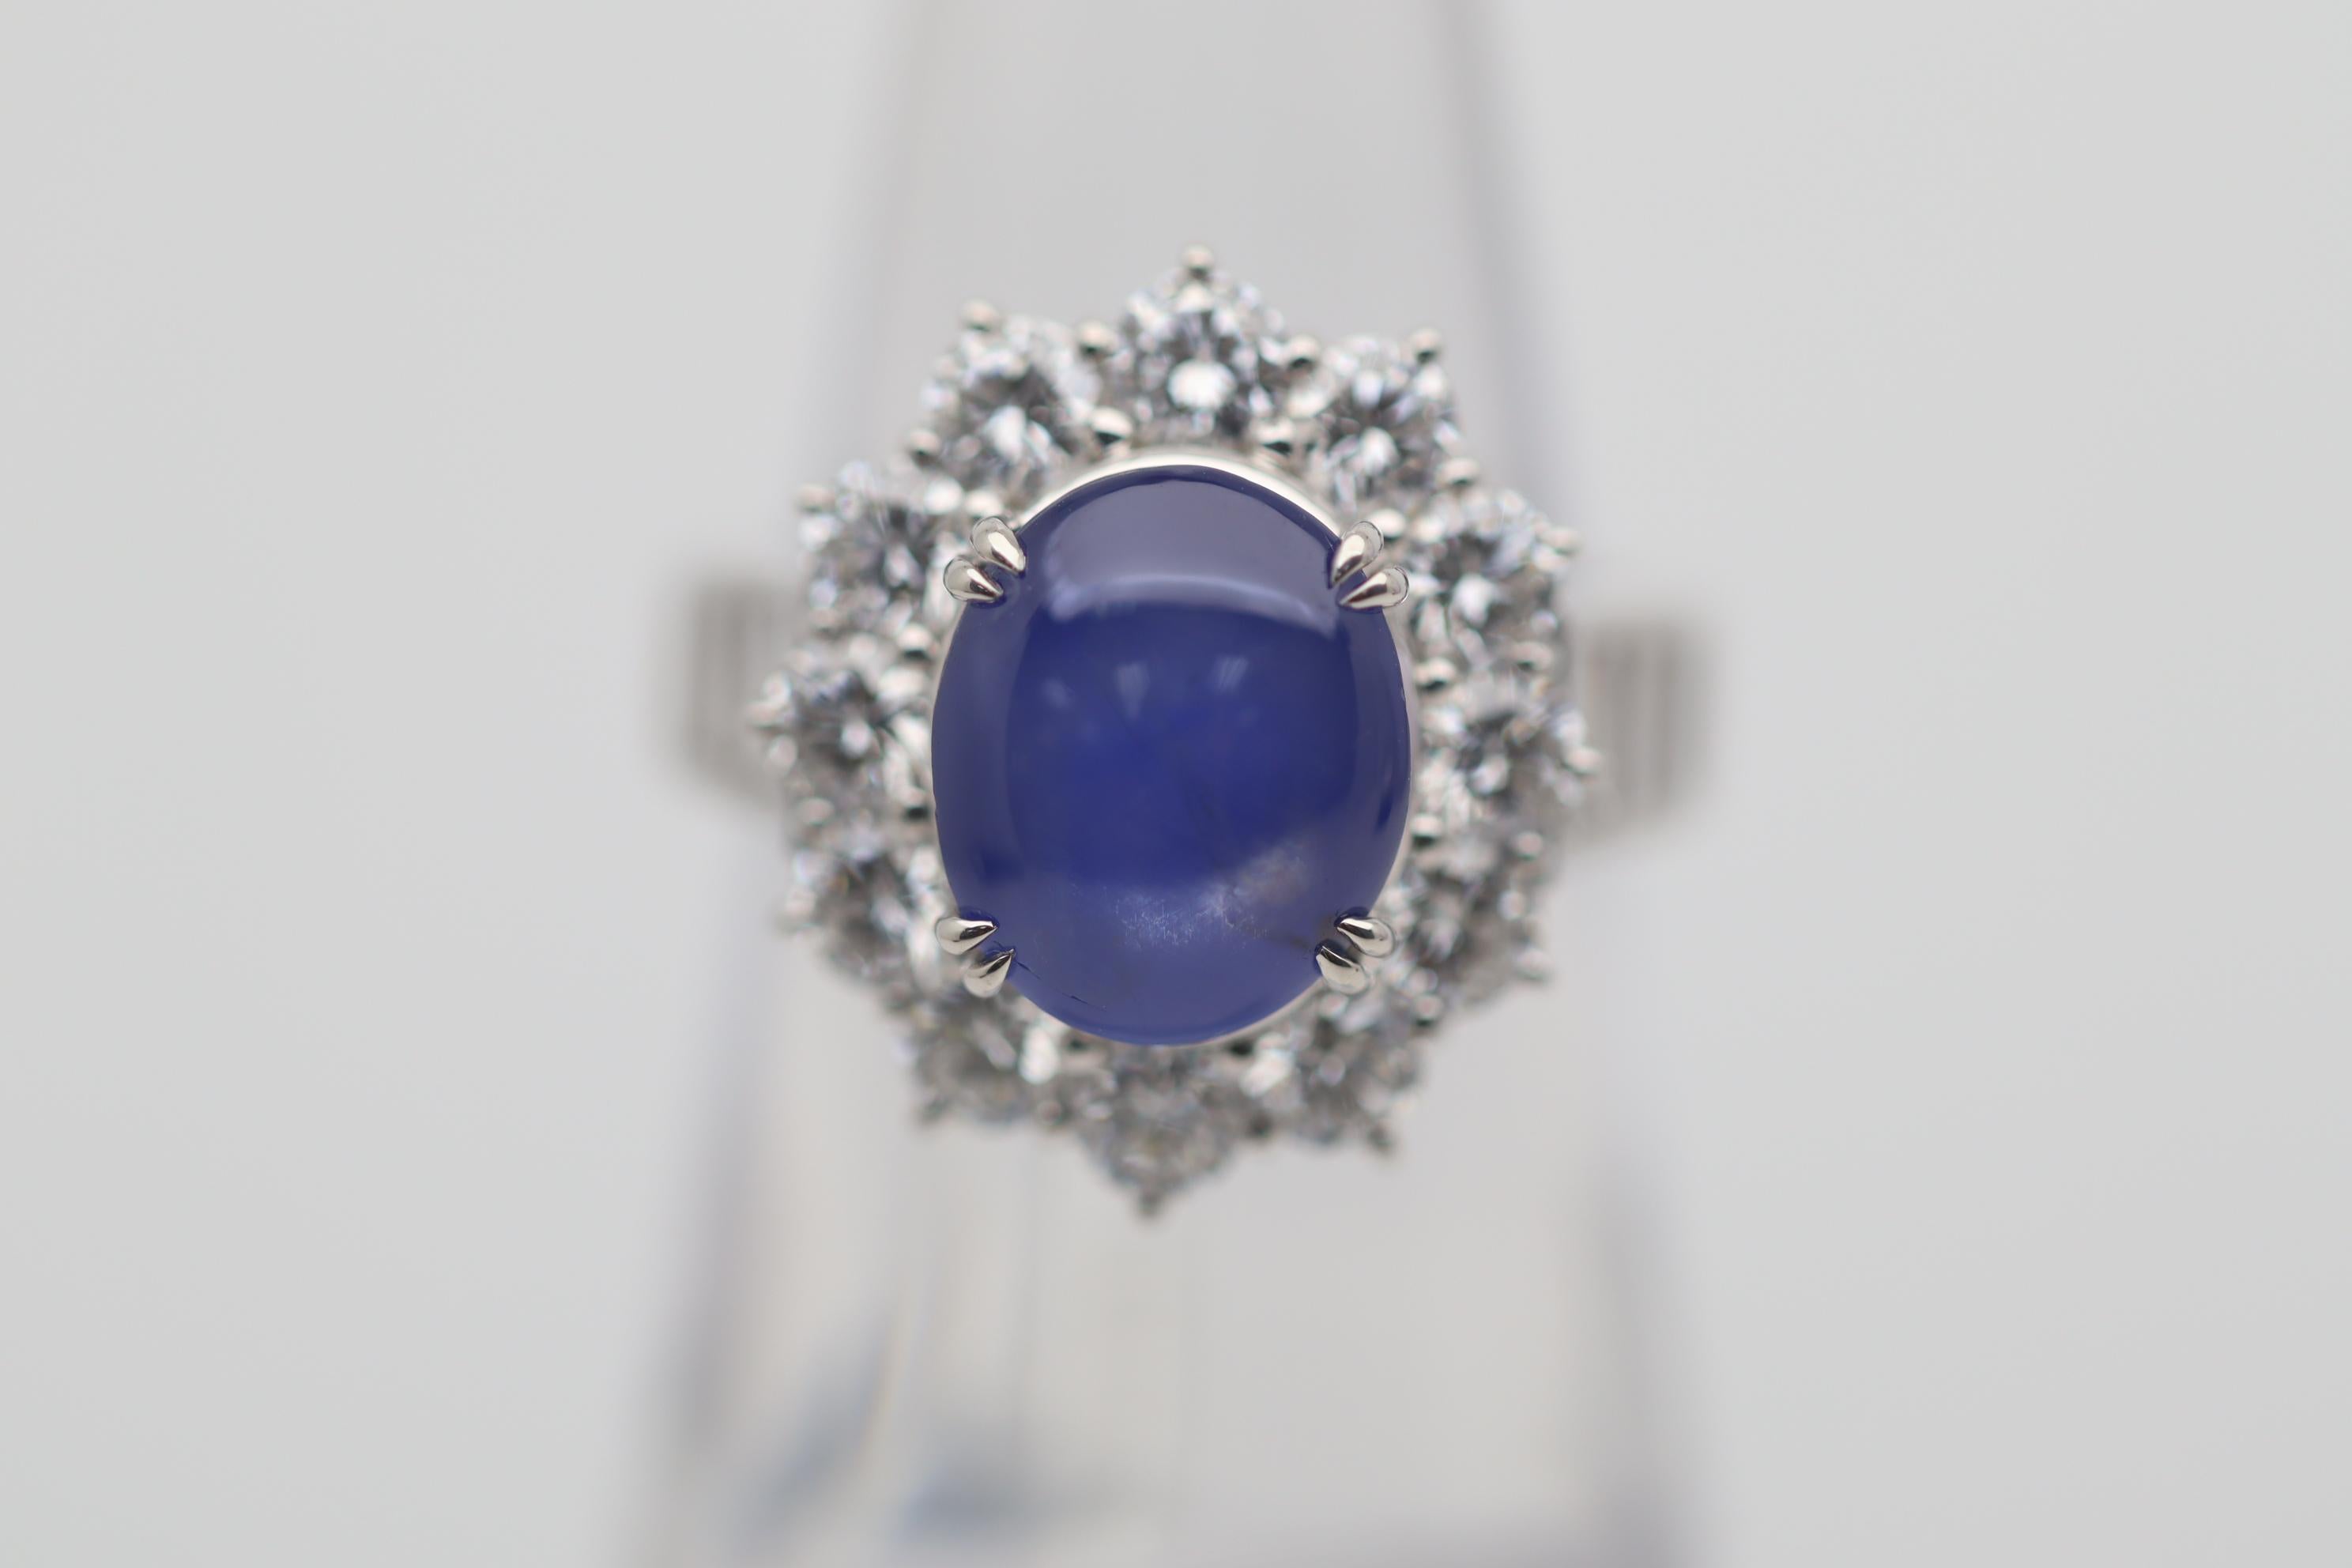 A chic, elegant, and very fine quality natural star sapphire takes center stage. It weighs an impressive 7.56 carats and has rich pure blue color rarely seen in star sapphires. Adding to that, the stone is untreated and unheated, and has a strong